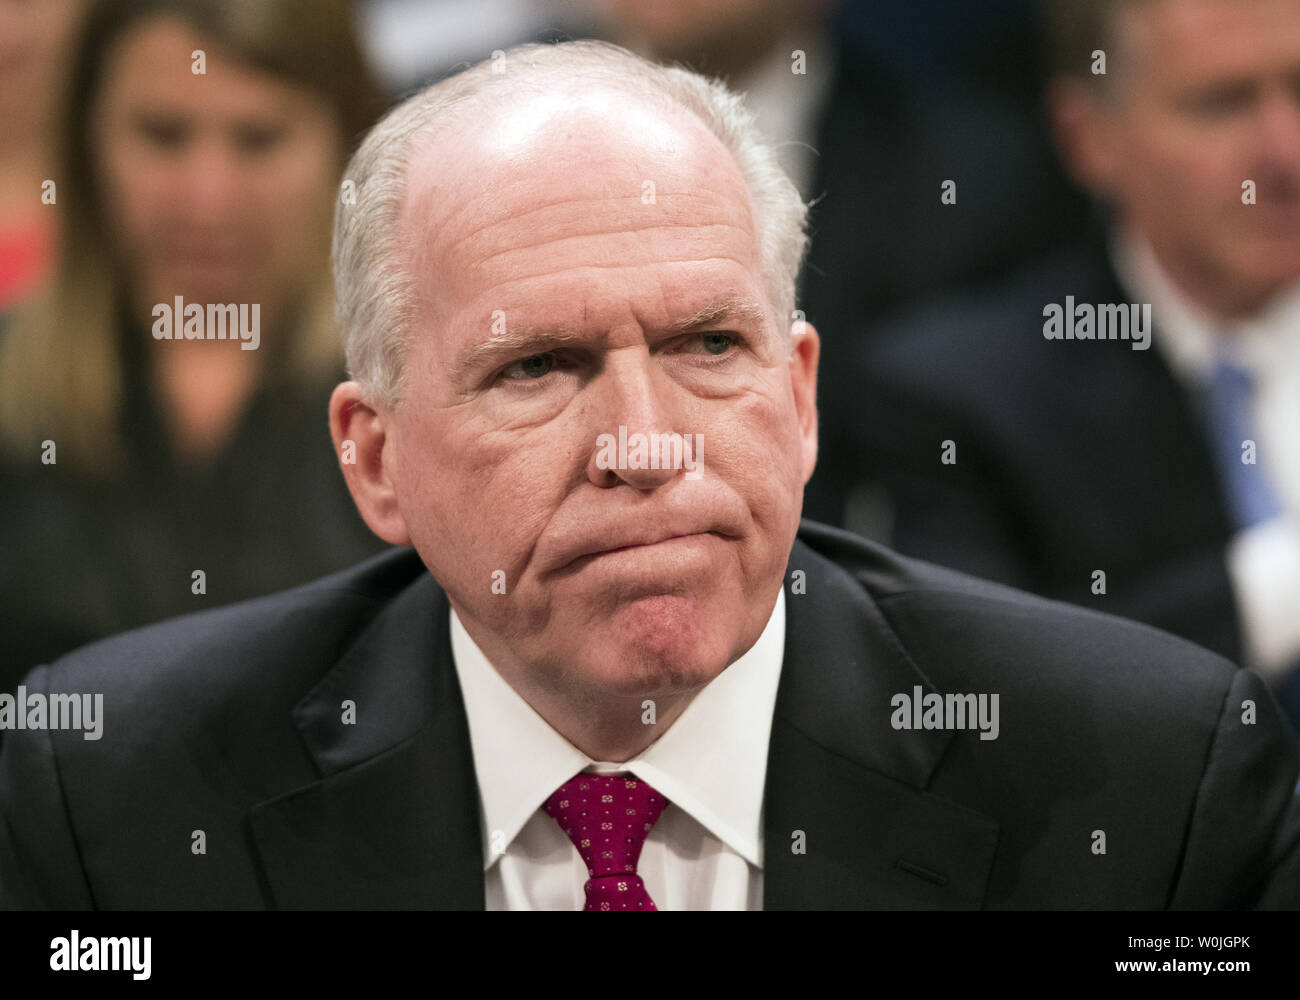 John Brennan, former Director of the Central Intelligence Agency, testifies on Russian meddling in the 2016 U.S. presidential election during a House Intelligence Committee hearing on Capitol Hill in Washington, D.C. on May 23, 2017. Photo by Kevin Dietsch/UPI Stock Photo